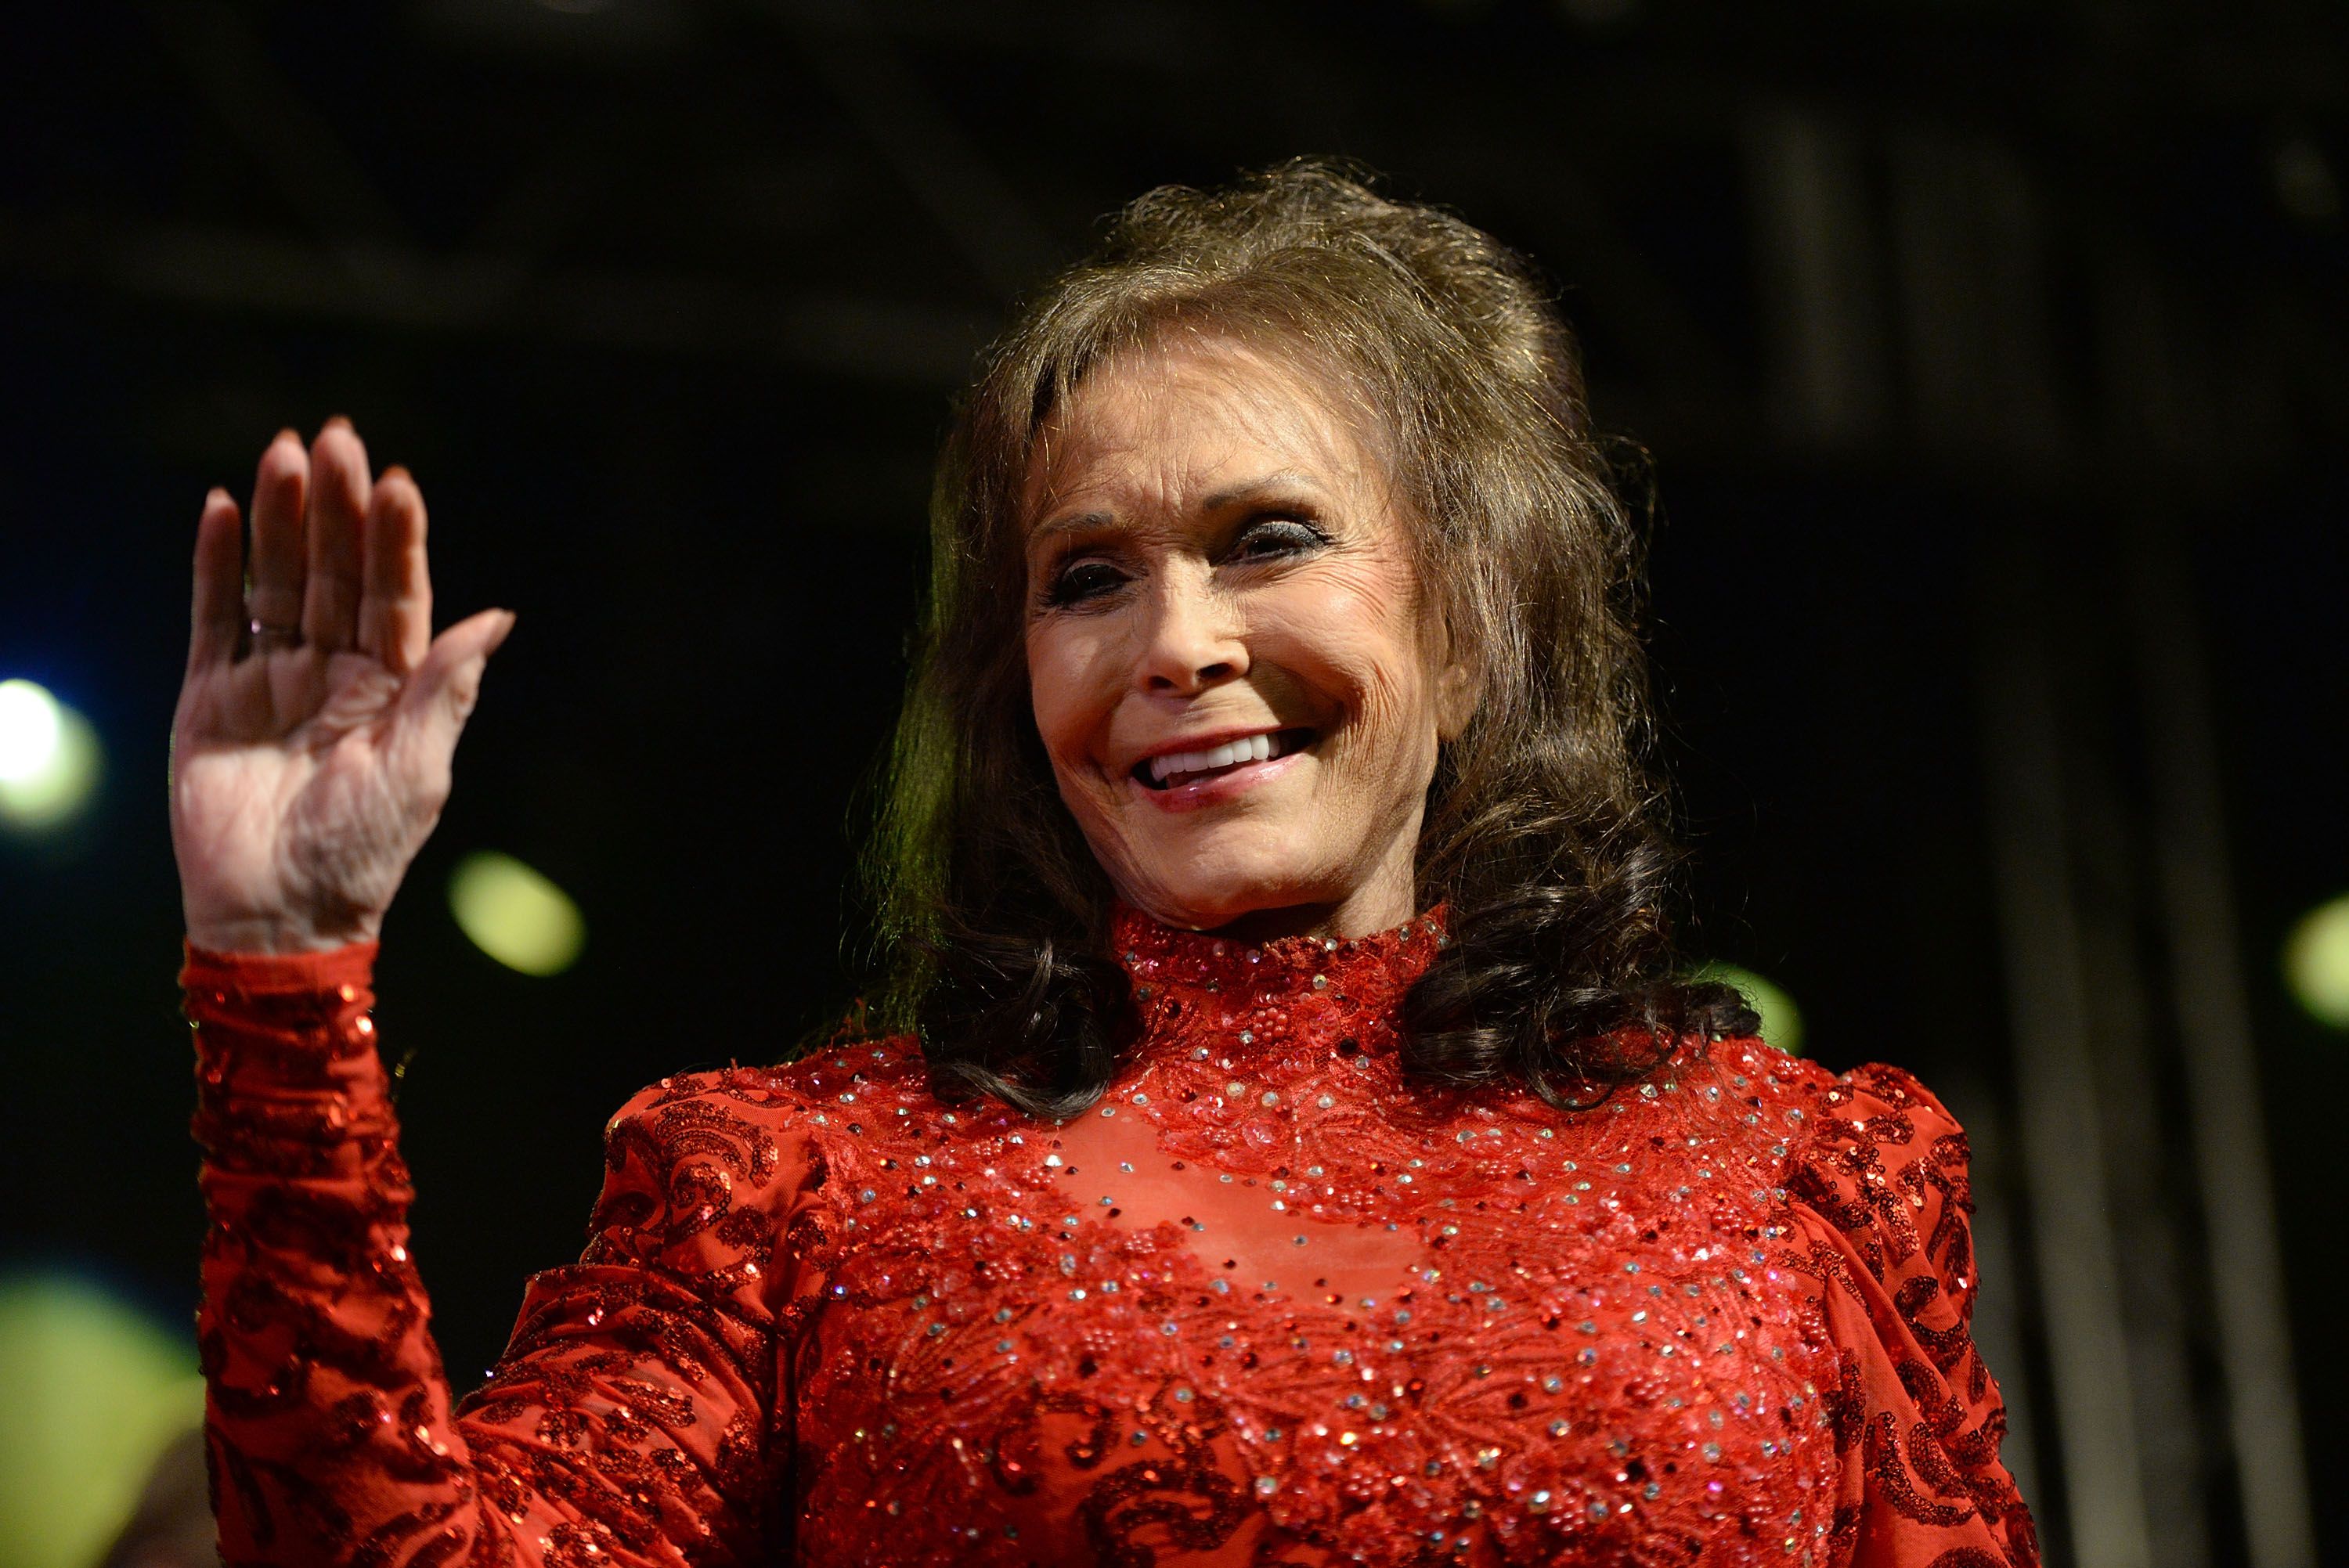 Loretta Lynn performs onstage at Stubbs on March 17, 2016 in Austin, Texas. | Source: Getty Images